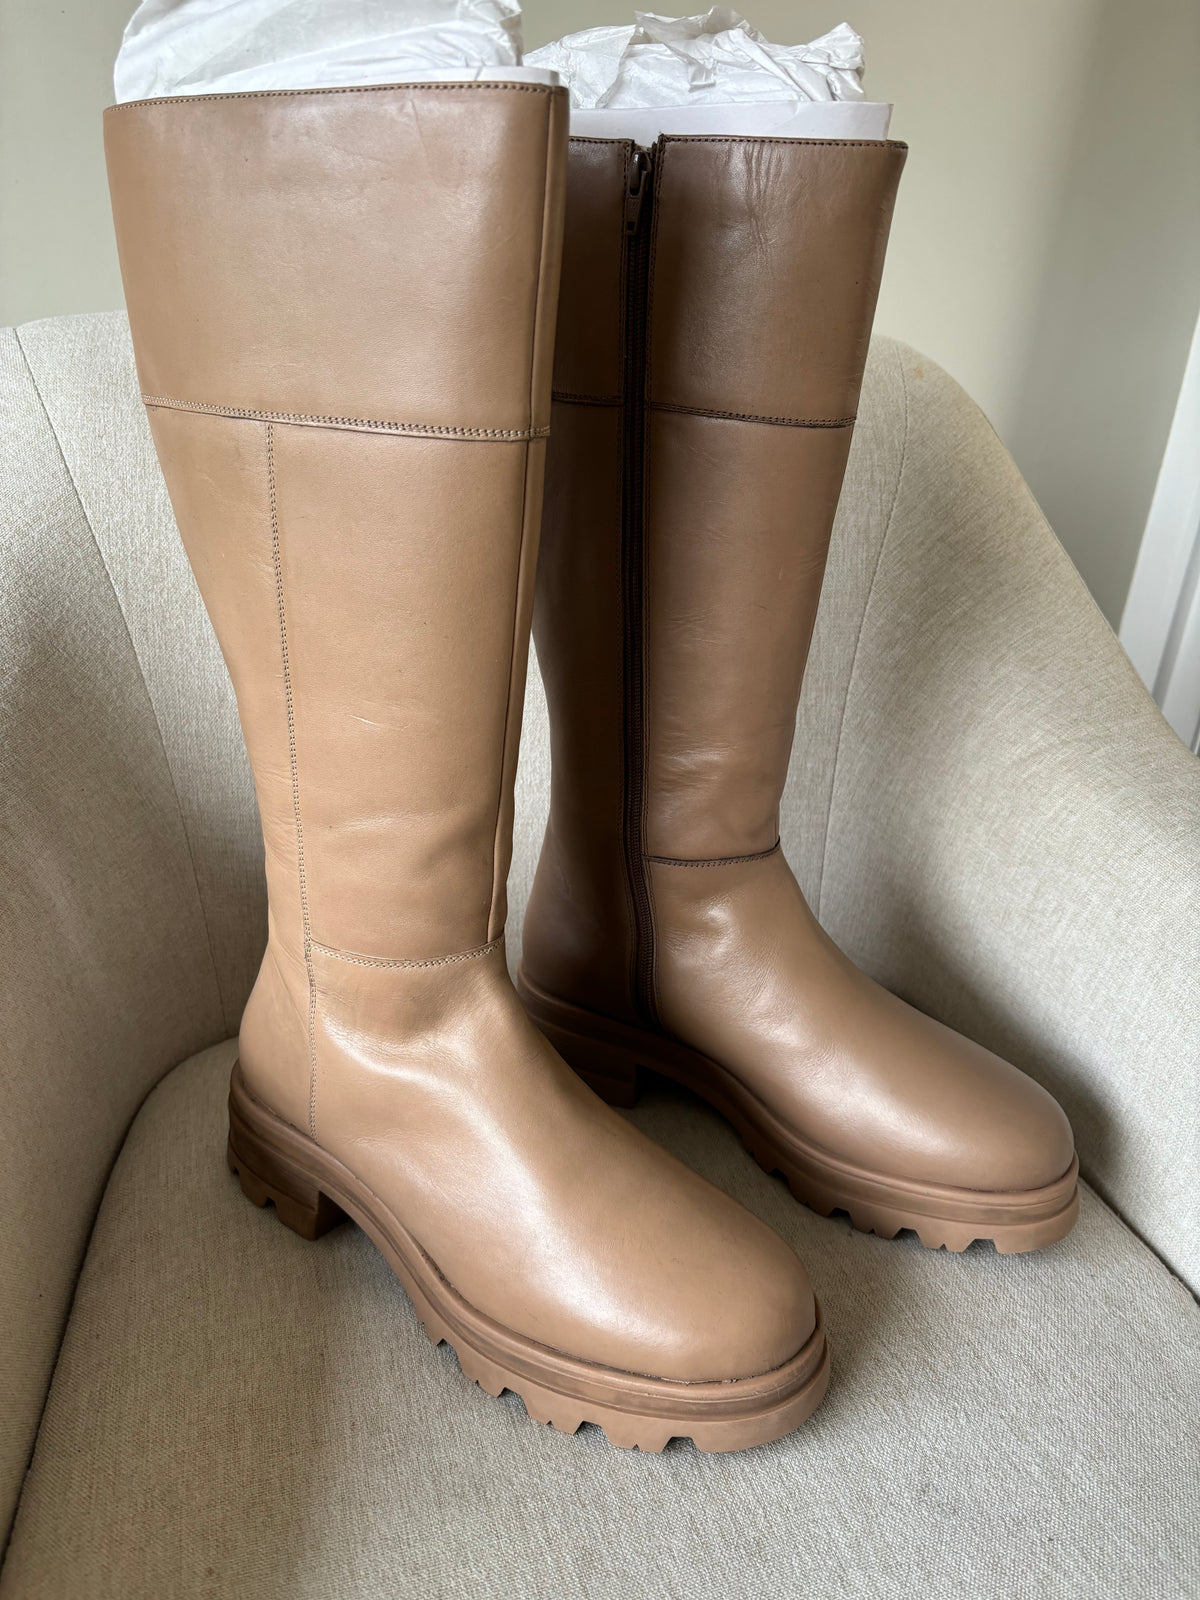 Kaleidoscope Cleated Leather Long Boots Size 8